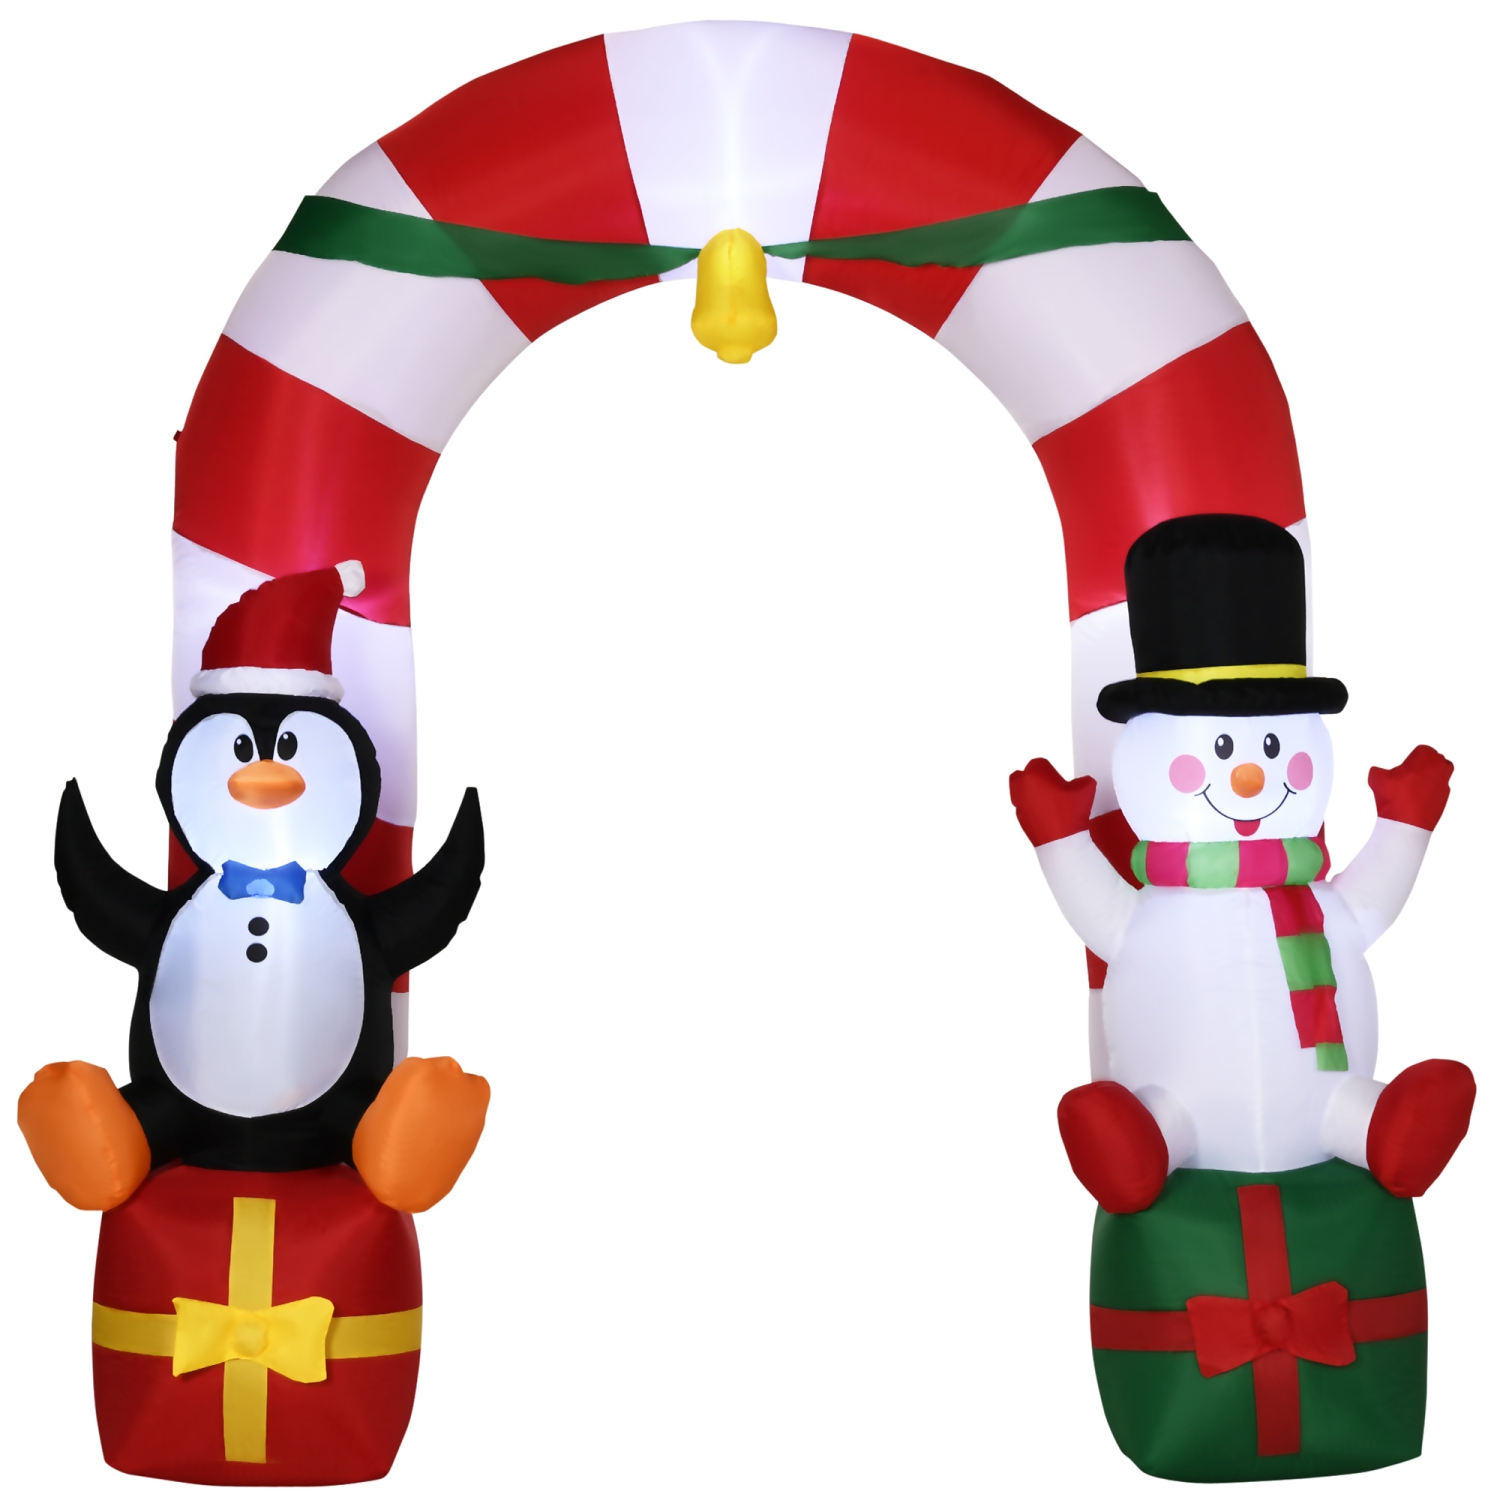 Outsunny 9ft Inflatable Christmas Candy Cane Arch with Penguin Snowman Sitting on Top of Gift Boxes, Blow-Up Outdoor LED Yard Display for Lawn Garden